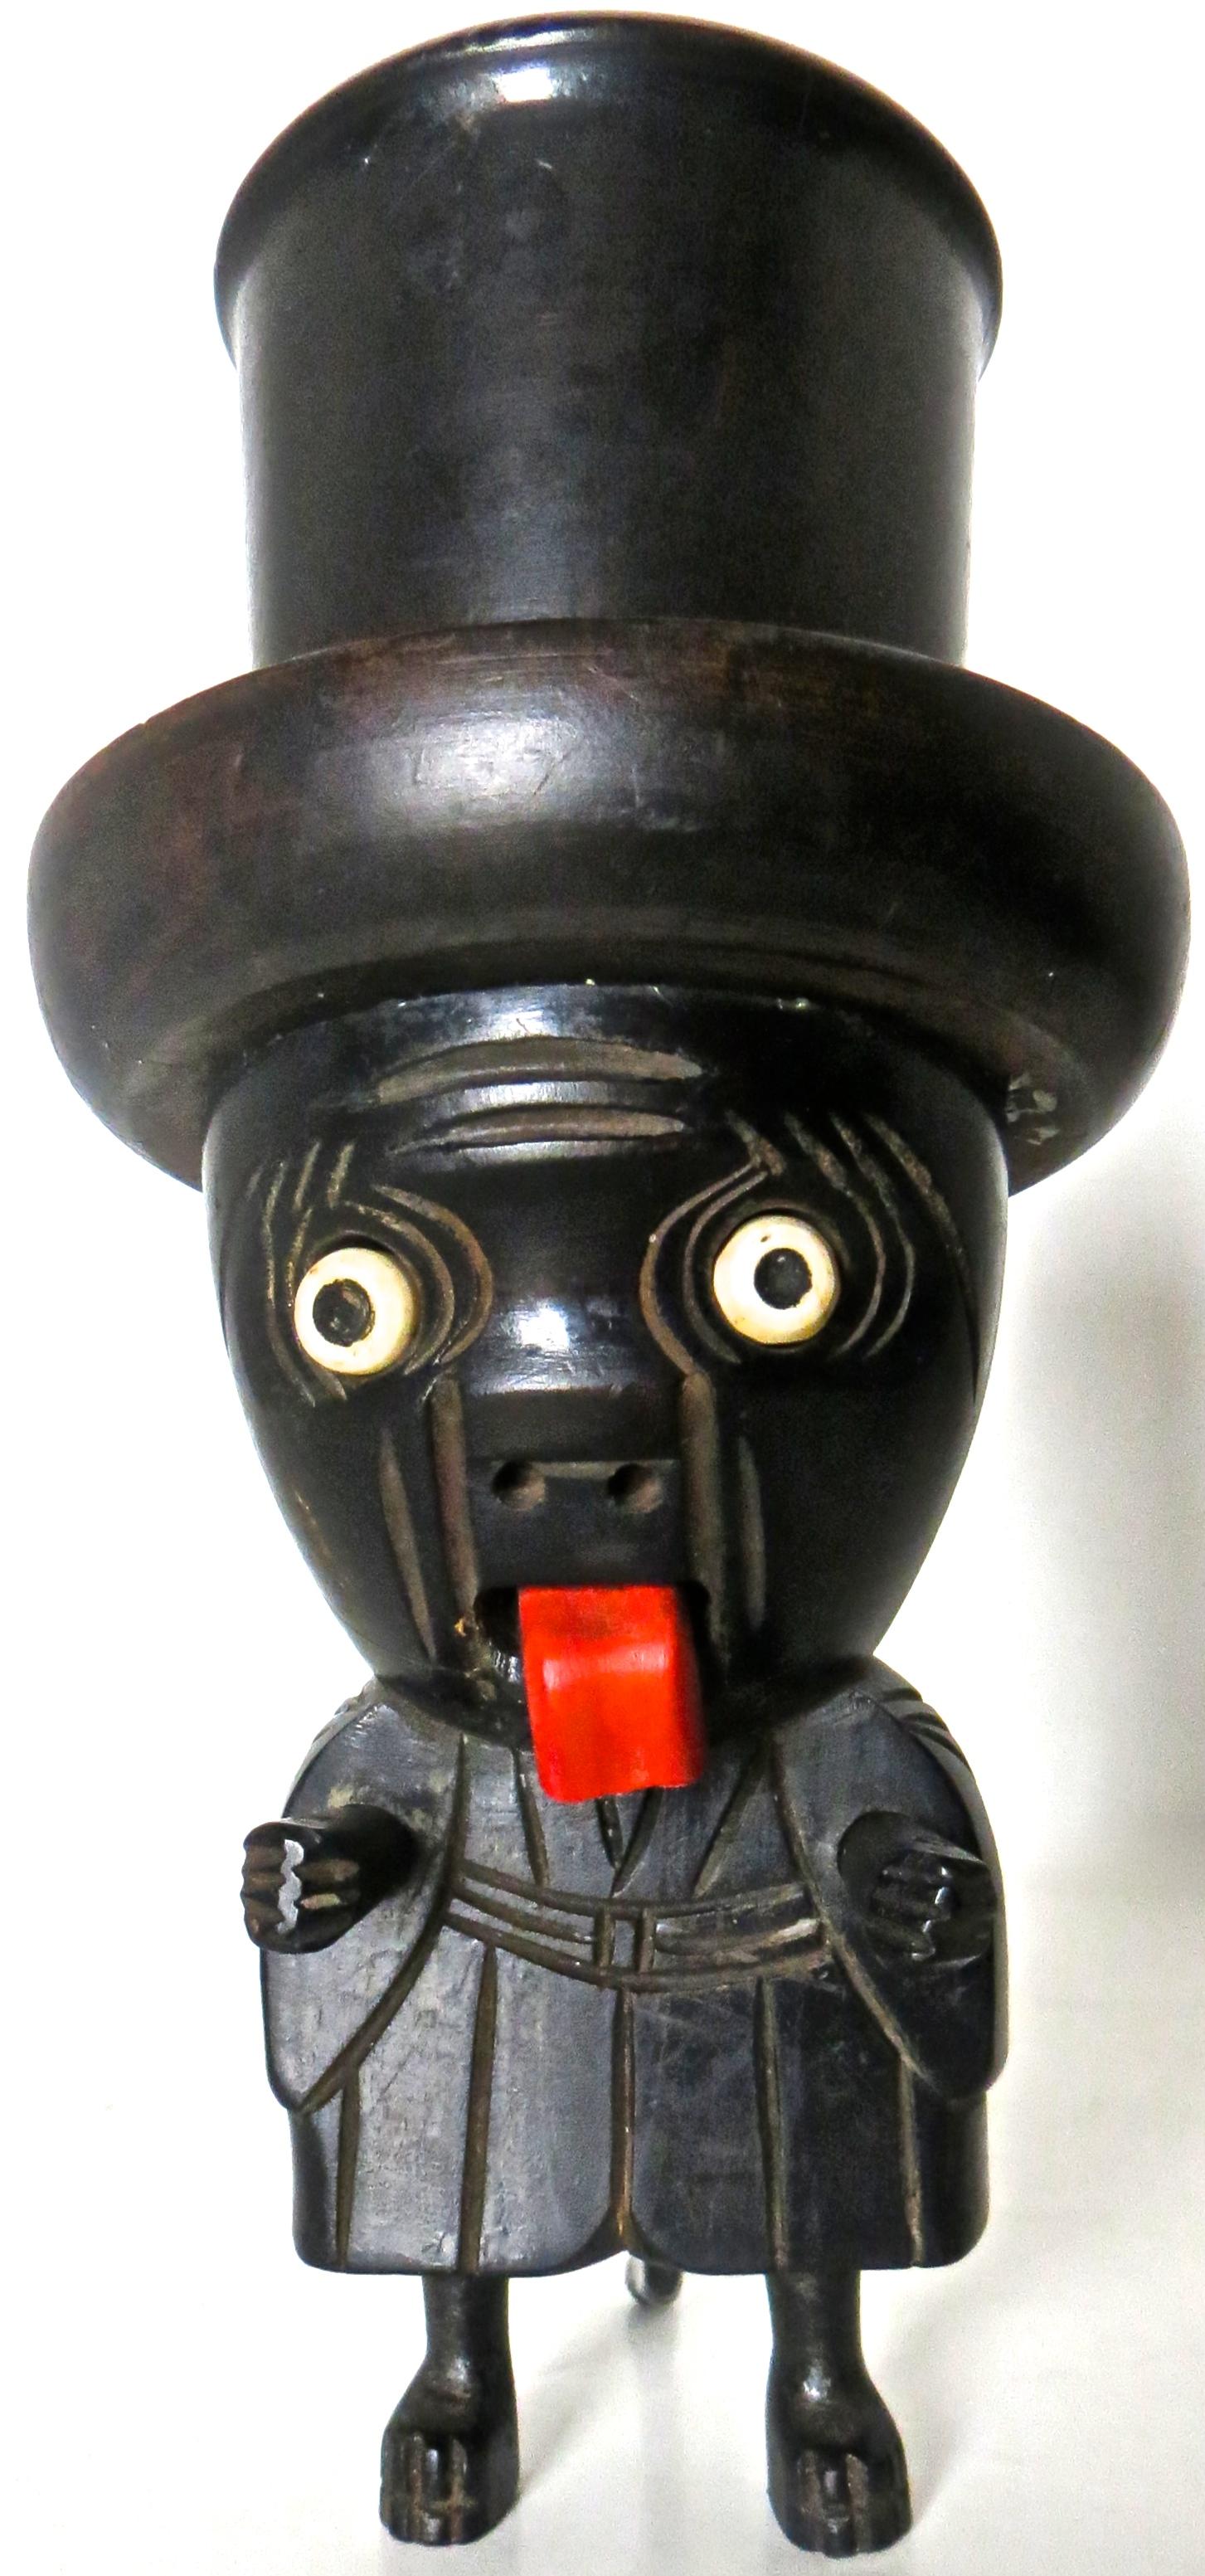 Kobe Toys are very mysterious and not much is known about them. They were created and hand made during the Meiji period in Japan, which covered the years 1868 until 1912. These particular (6) figural toys I date to around 1890 to 1900, although